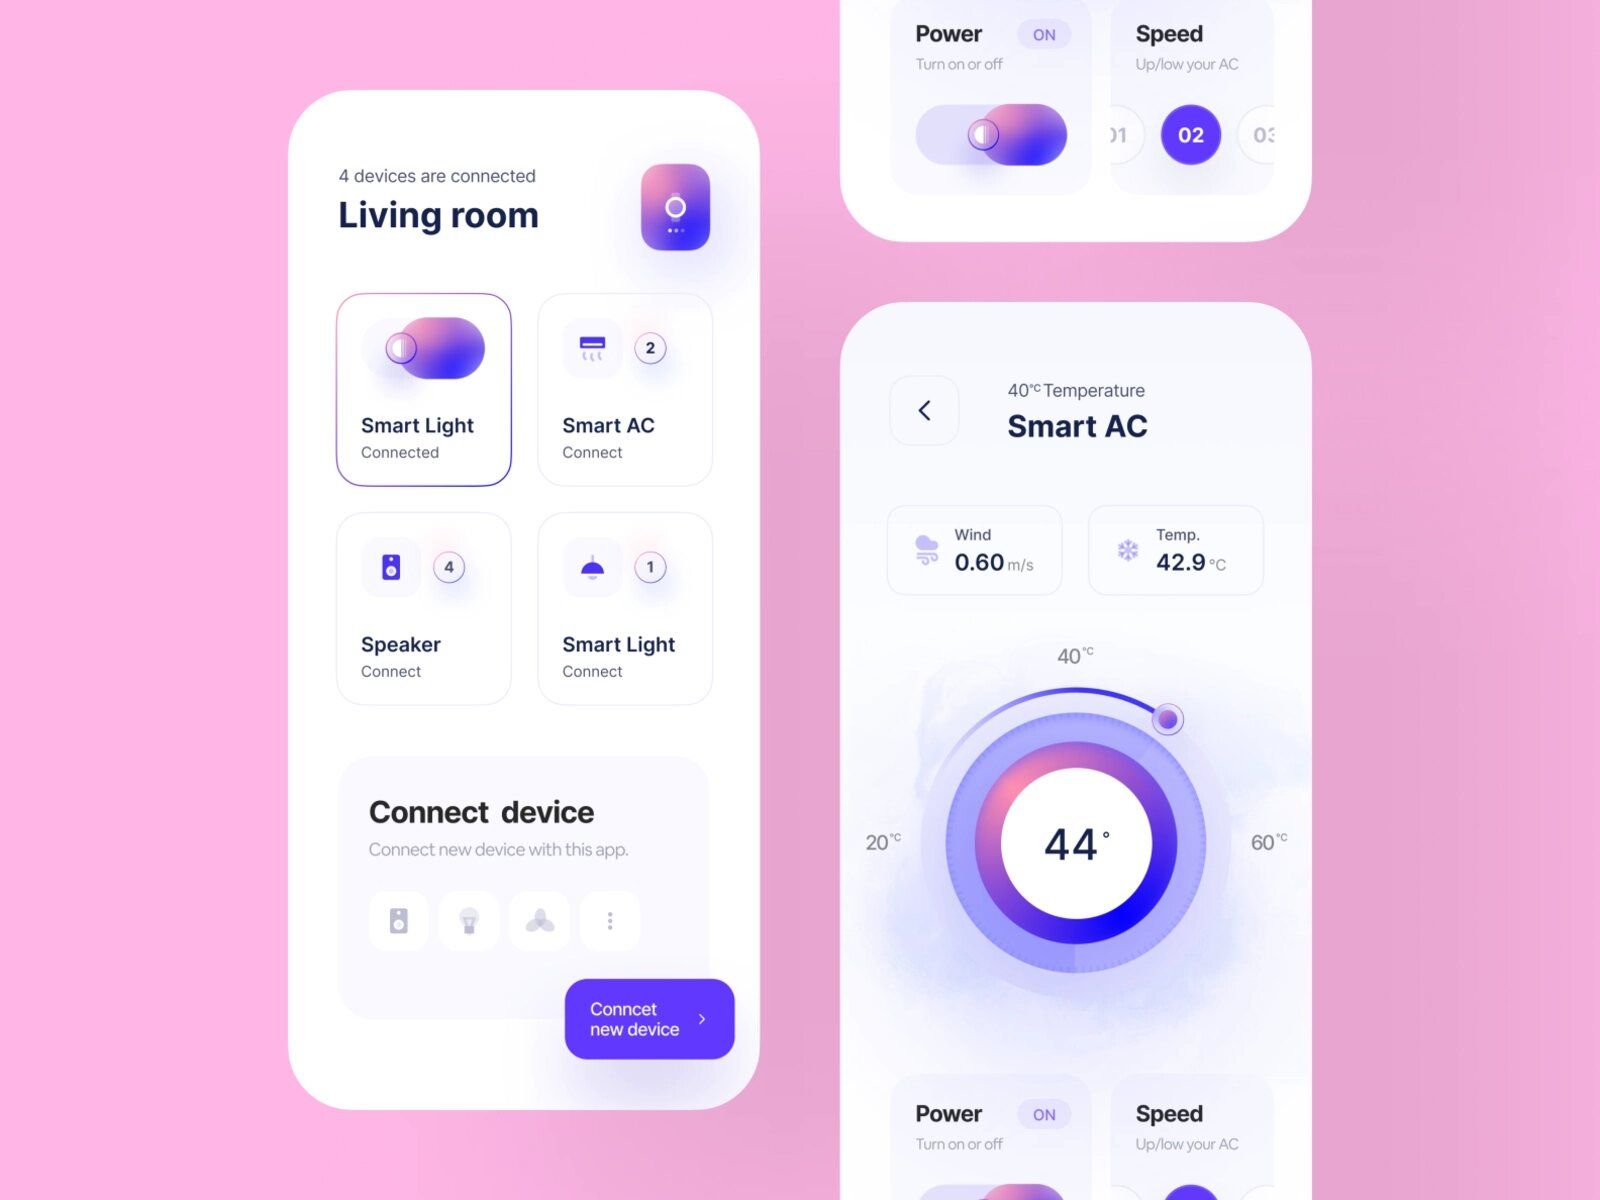 A smart home system for various IoT devices should include the device screen feature (*image by [Wahab](https://dribbble.com/Wstyle){ rel="nofollow" target="_blank" .default-md}*)